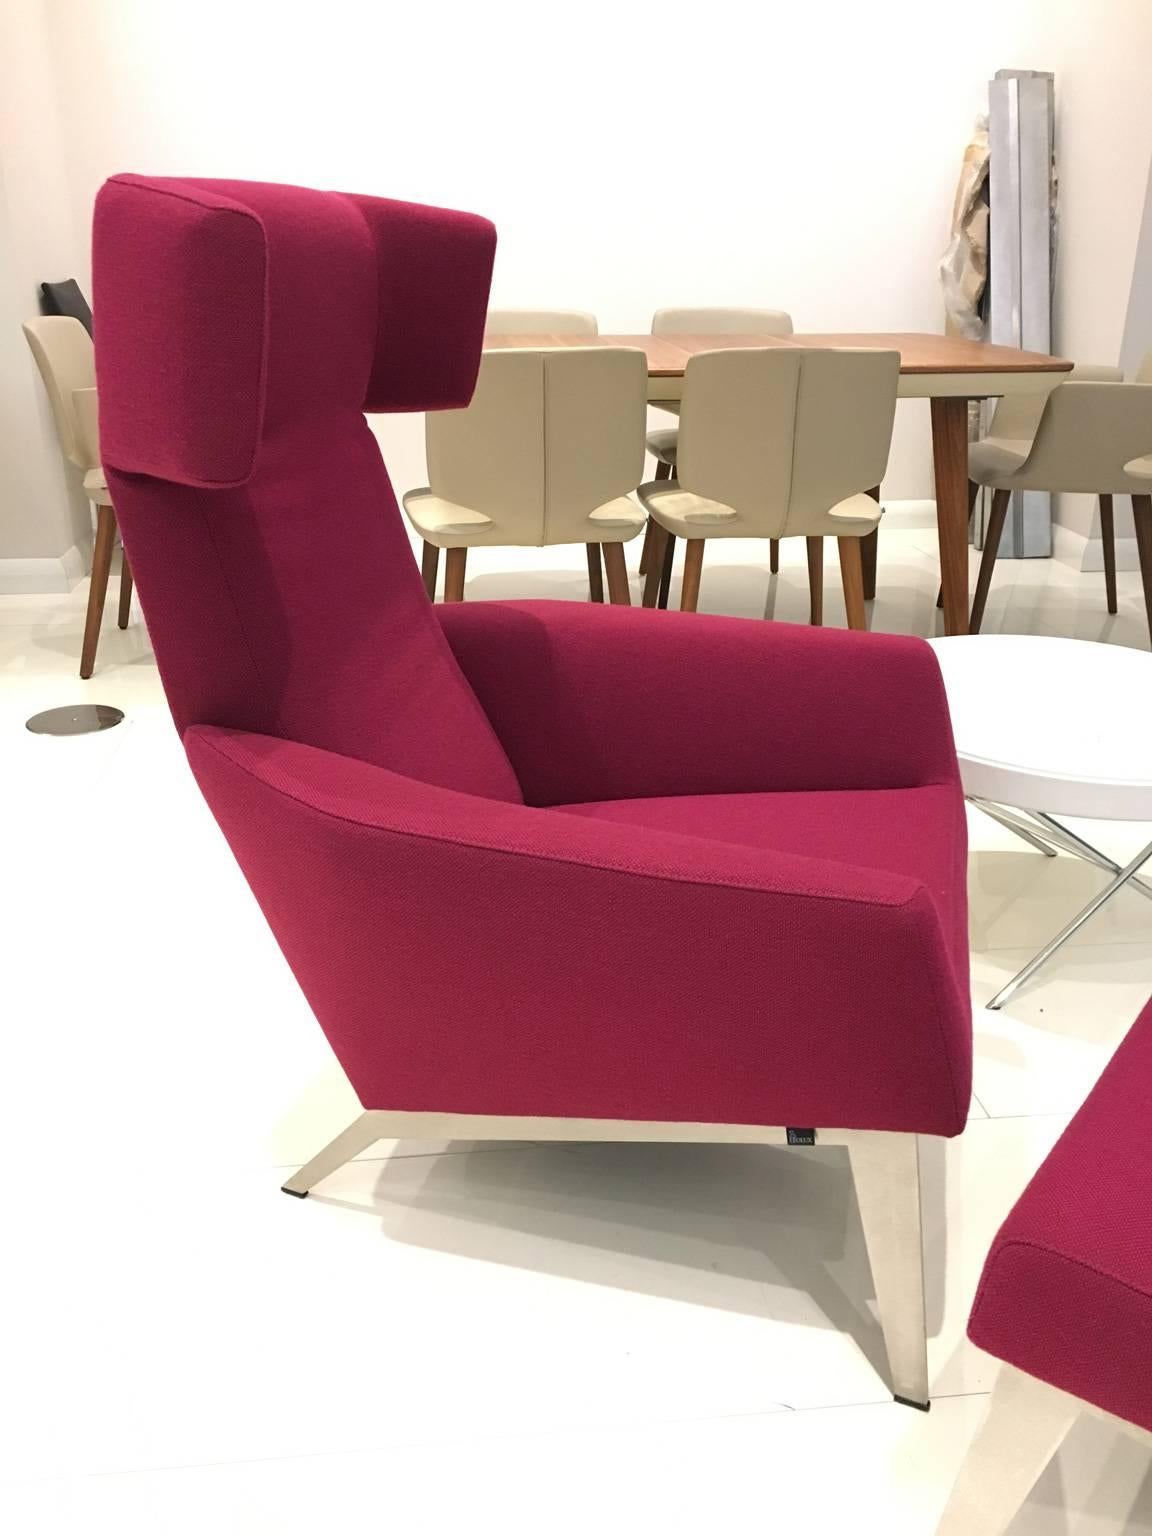 Armchair with recline function and matching ottoman upholstered in magenta fabric. Brushed stainless steel base. 

For almost eight decades, Leolux has been choosing the evolutionary route. Innovation and calm growth, steady but with a clear goal.